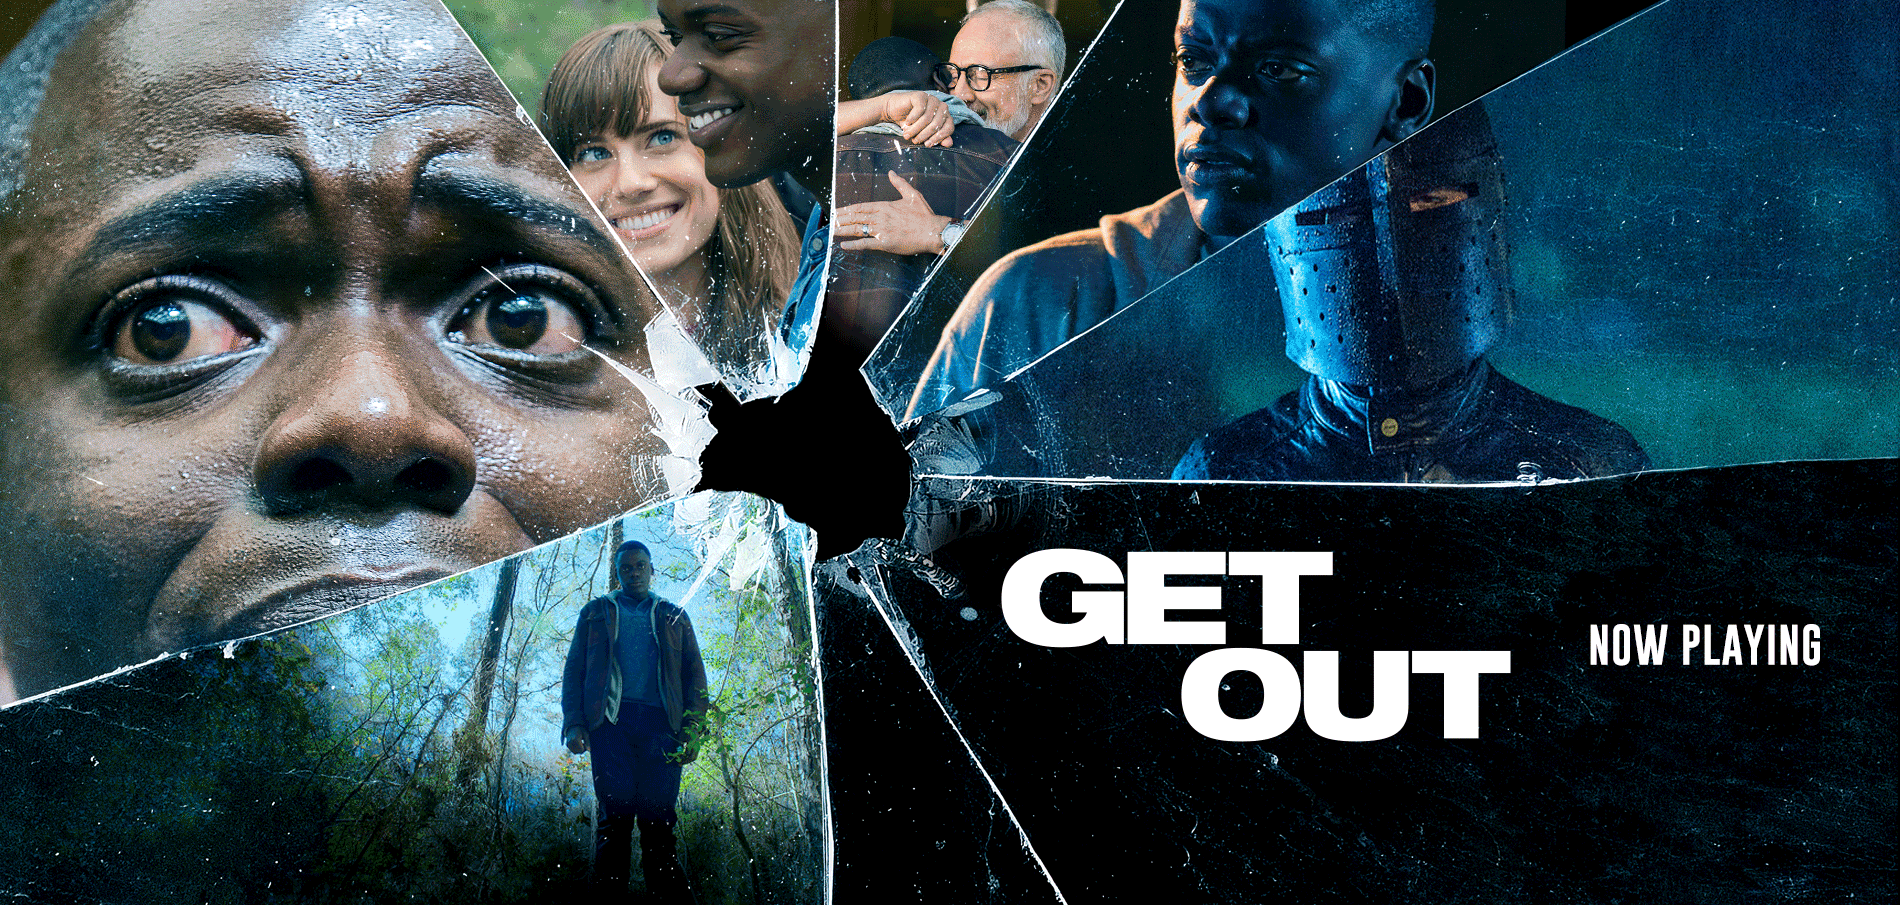 get out poster - Fast Weight Loss Plan - Do you find it Possible?